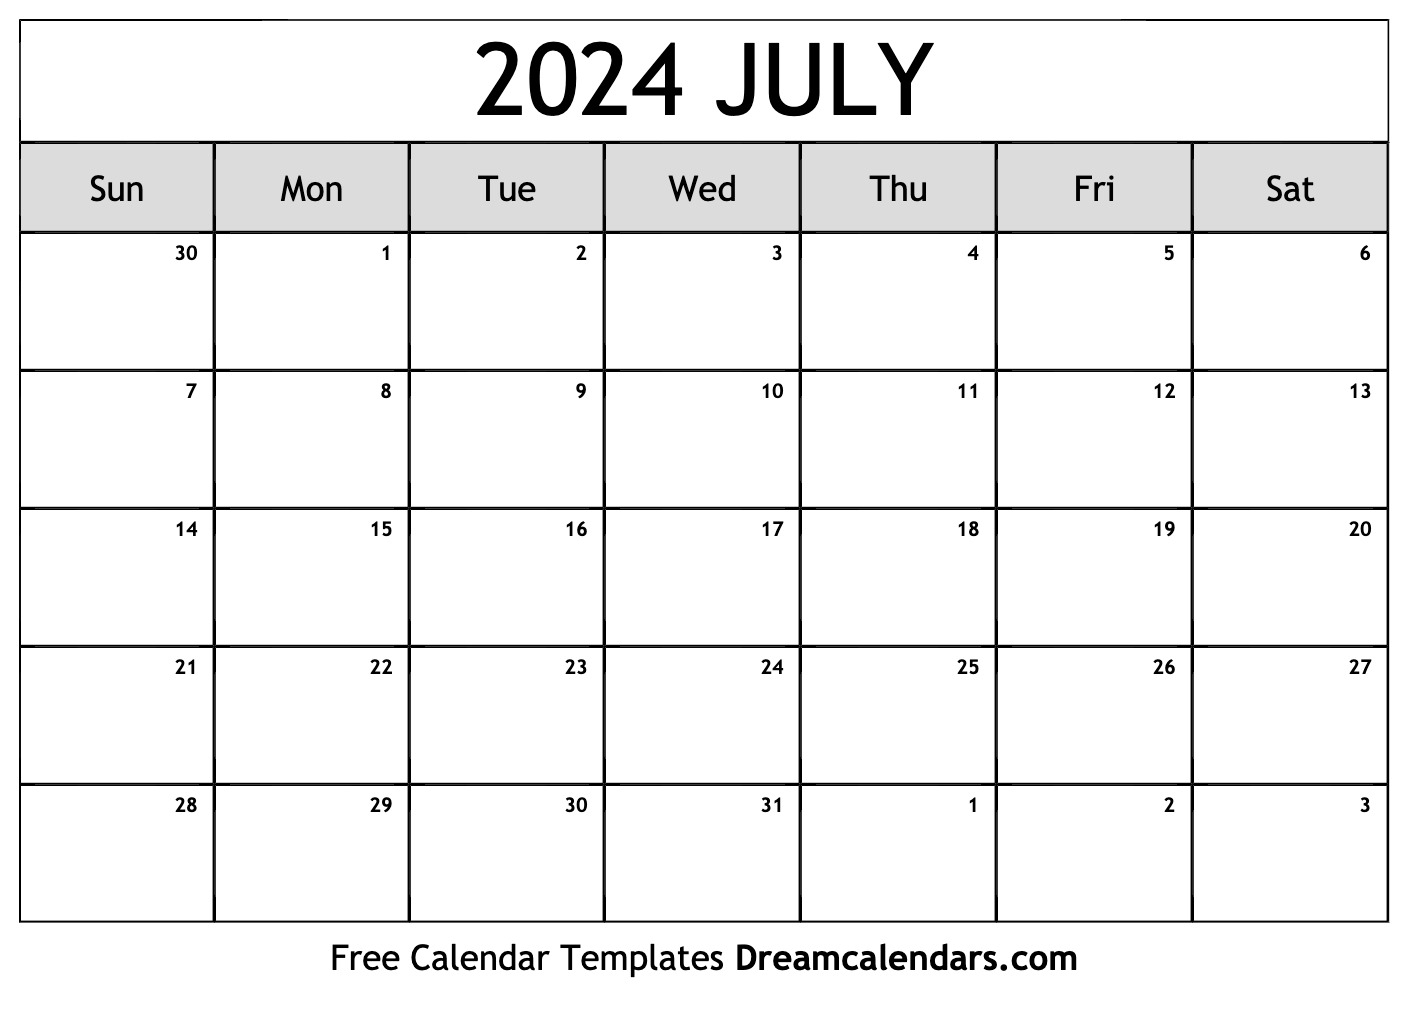 July 2024 Calendar | Free Blank Printable With Holidays for Blank Calendar July 2024 Printable